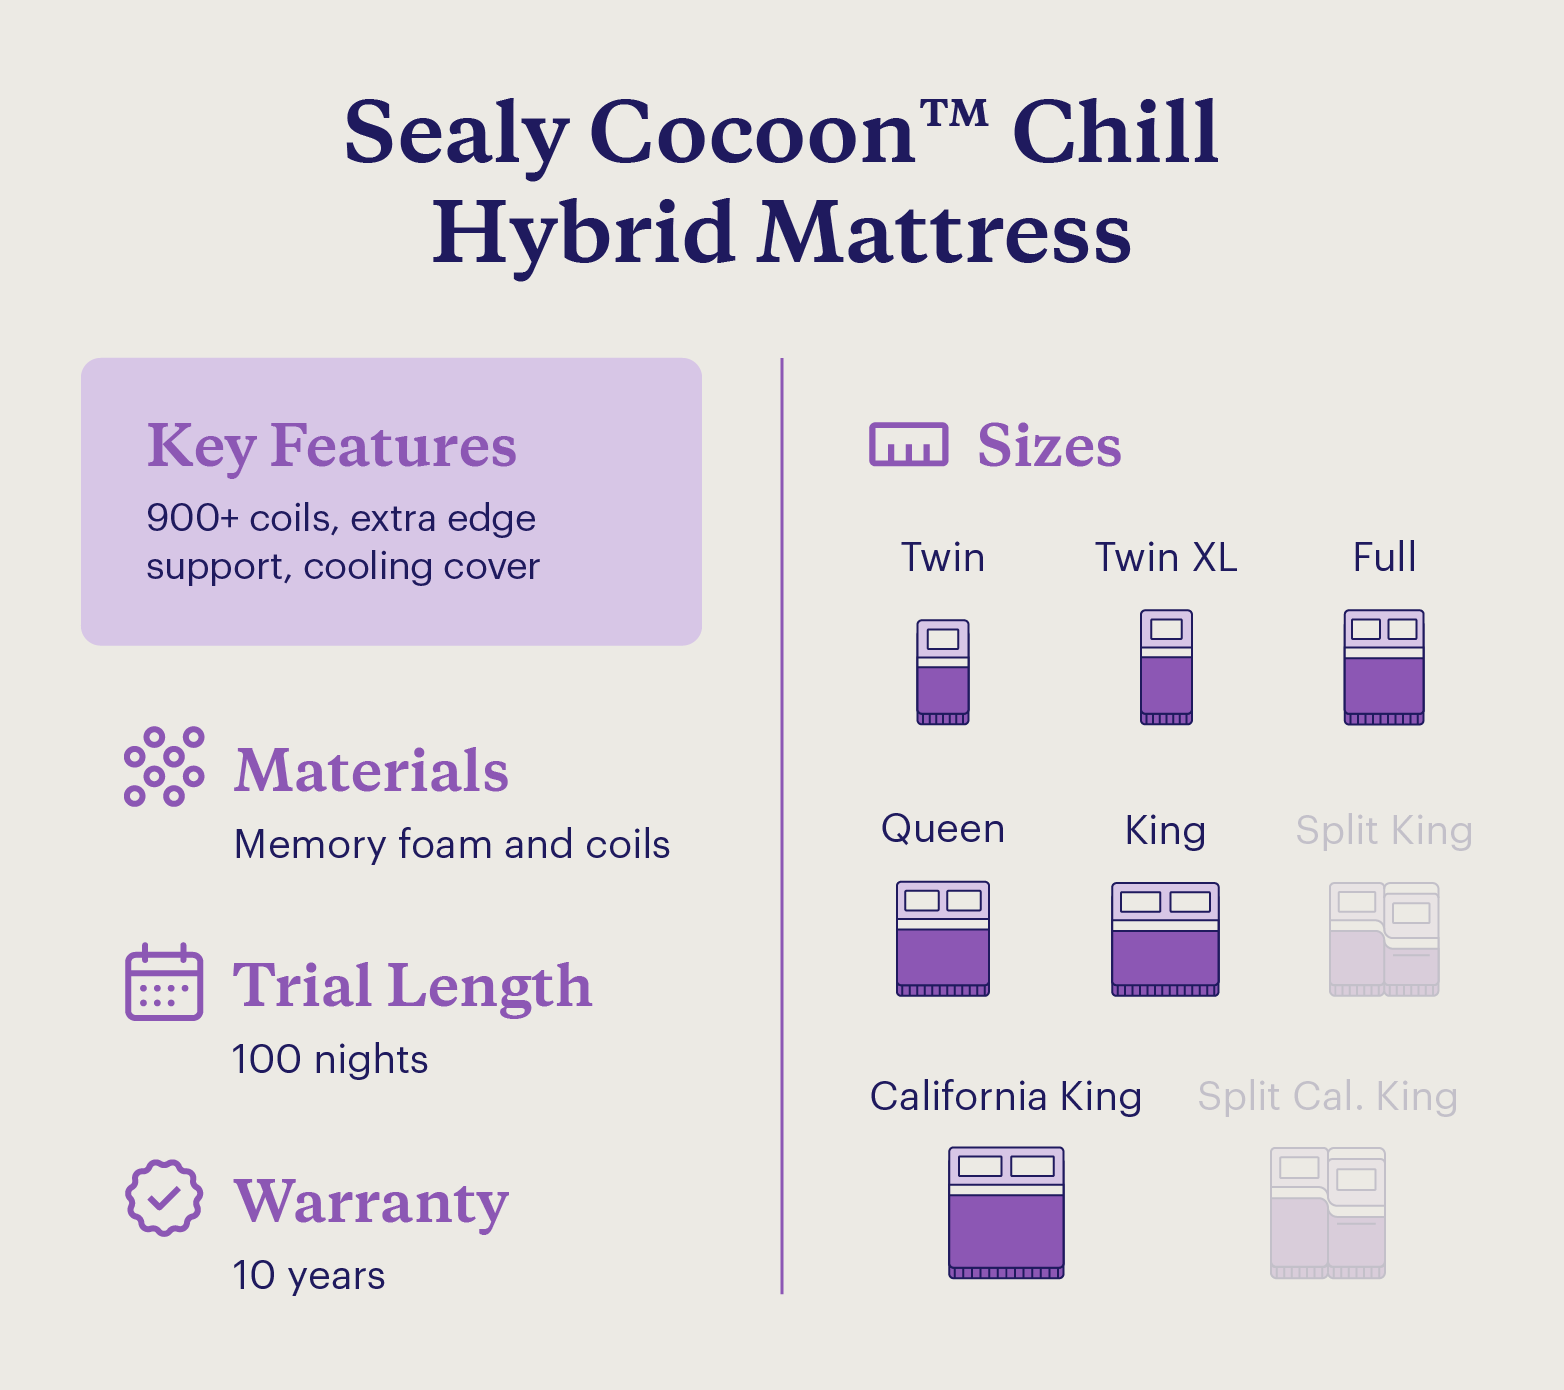 A graphic shows the key features and details of the Sealy Cocoon Chill Hybrid Mattress.